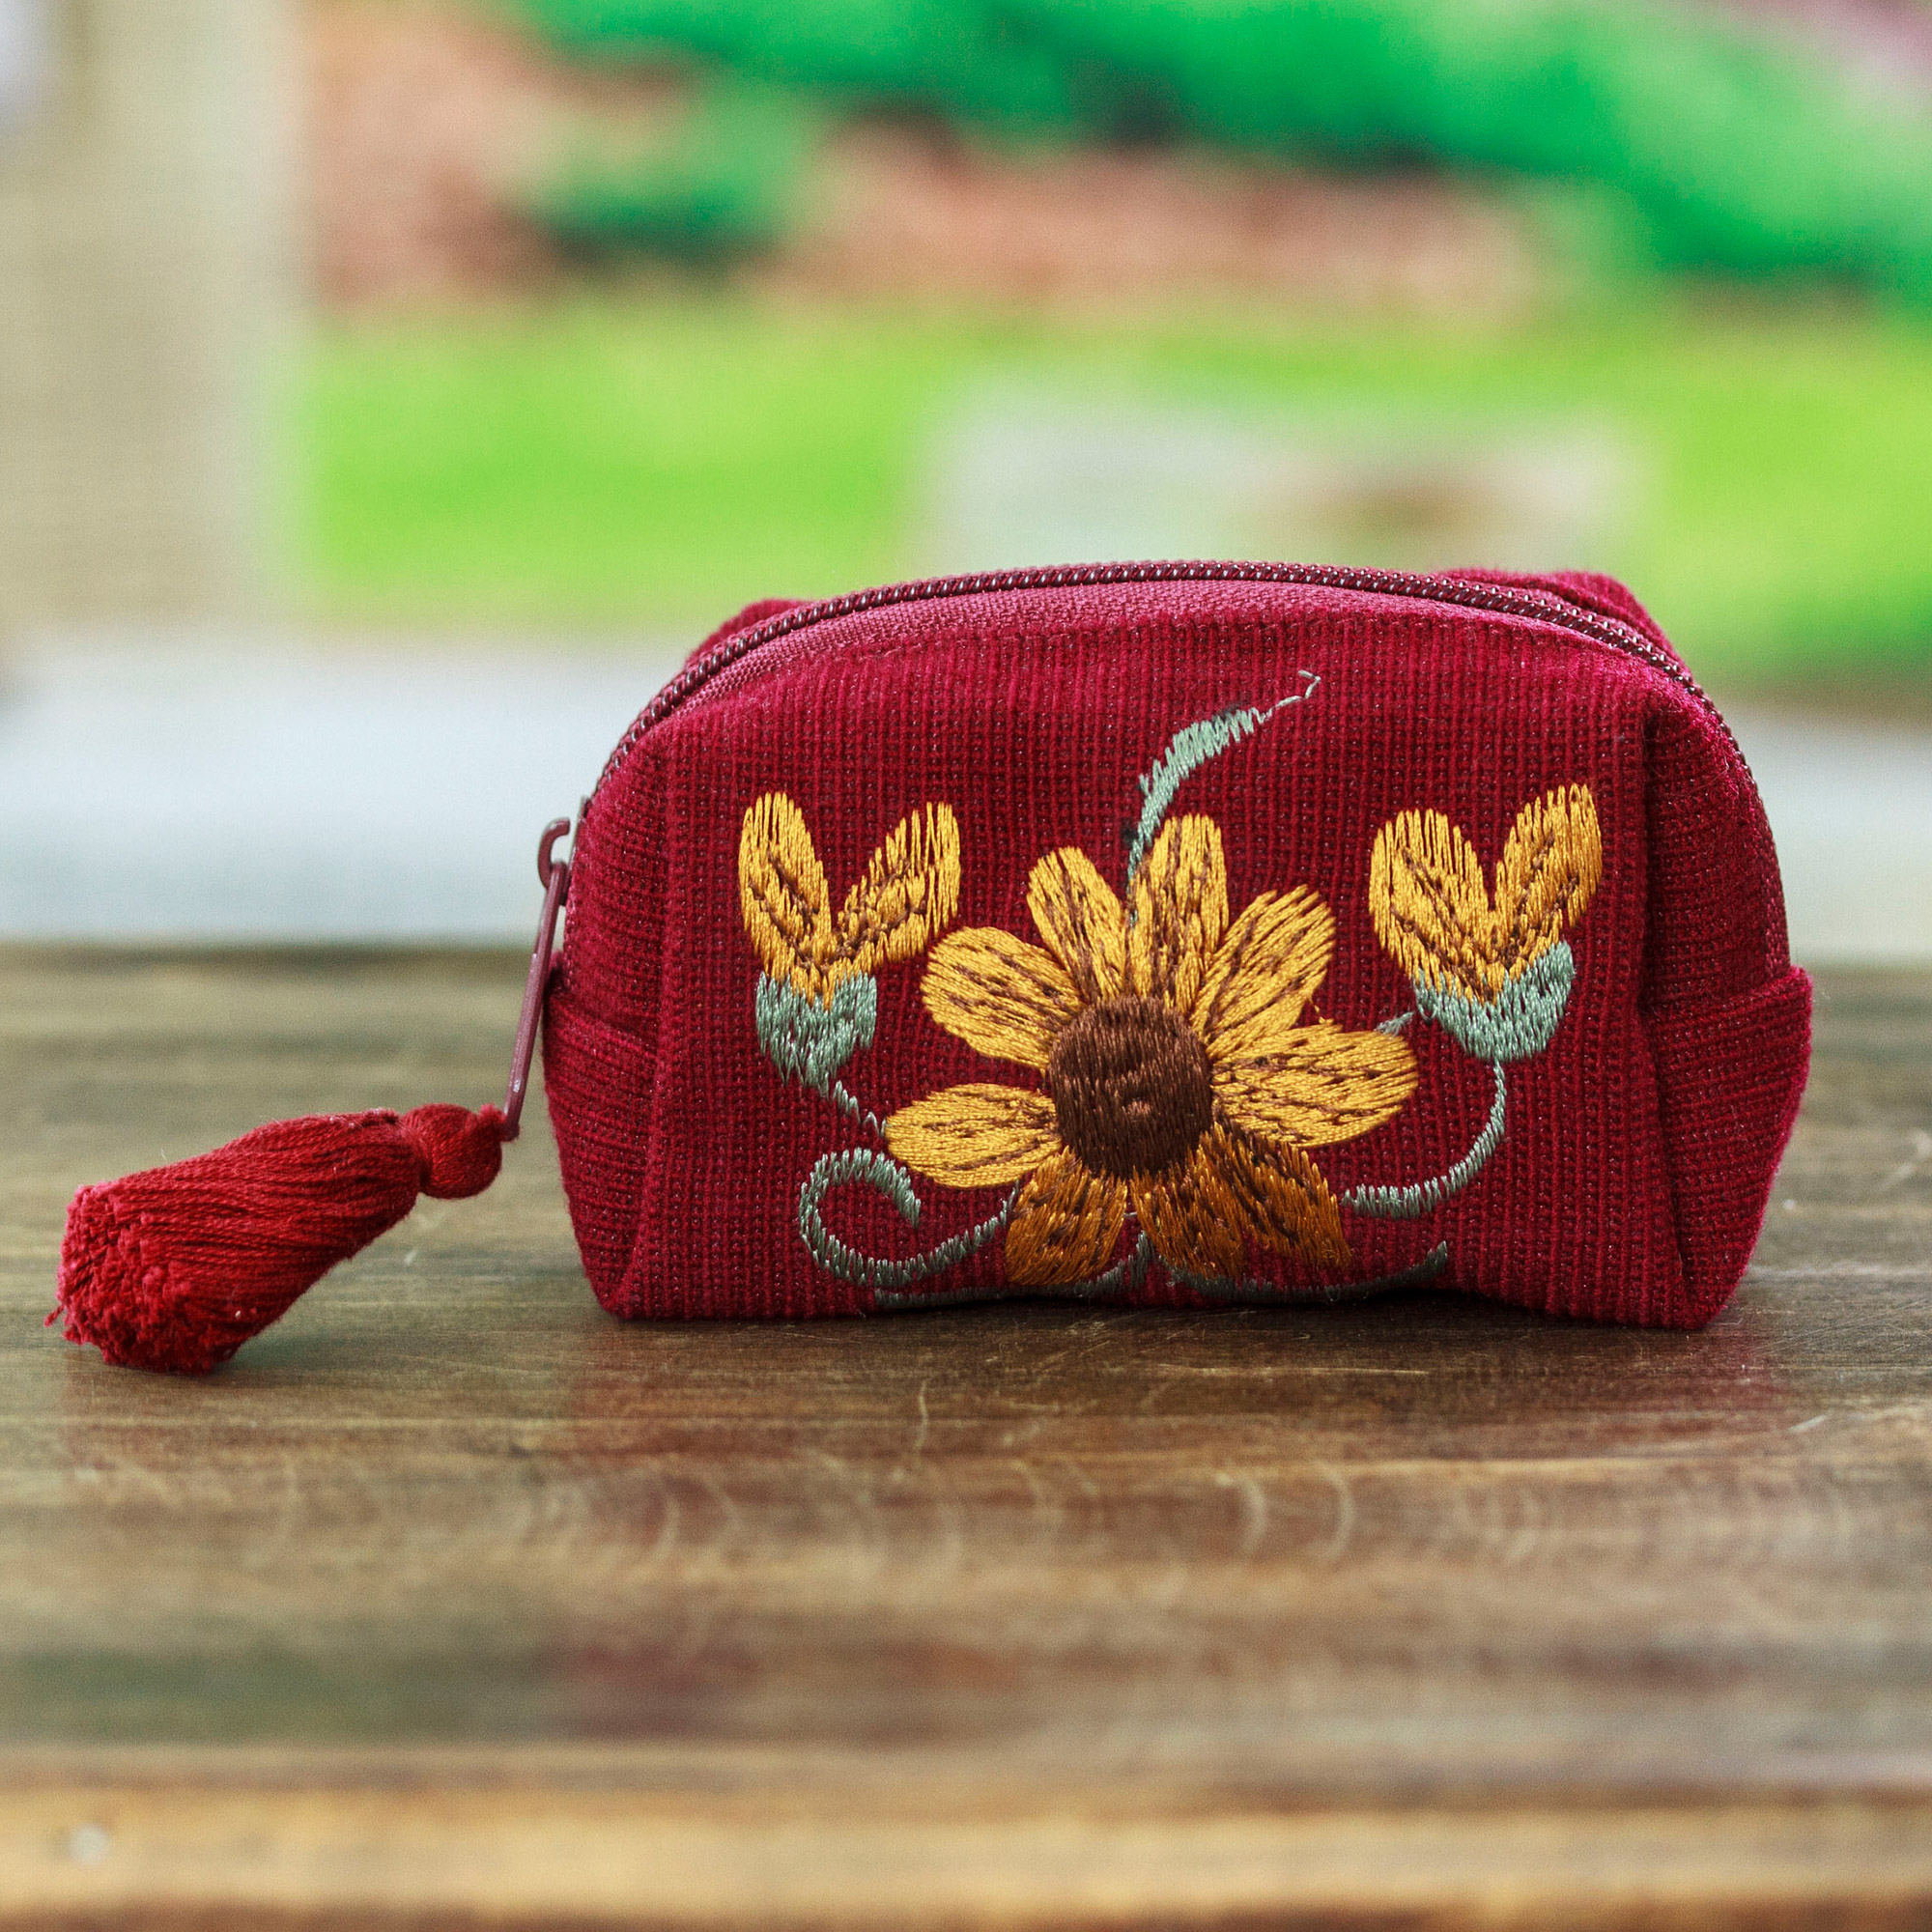 Mexican Embroidered Flowers Purse Medium (16